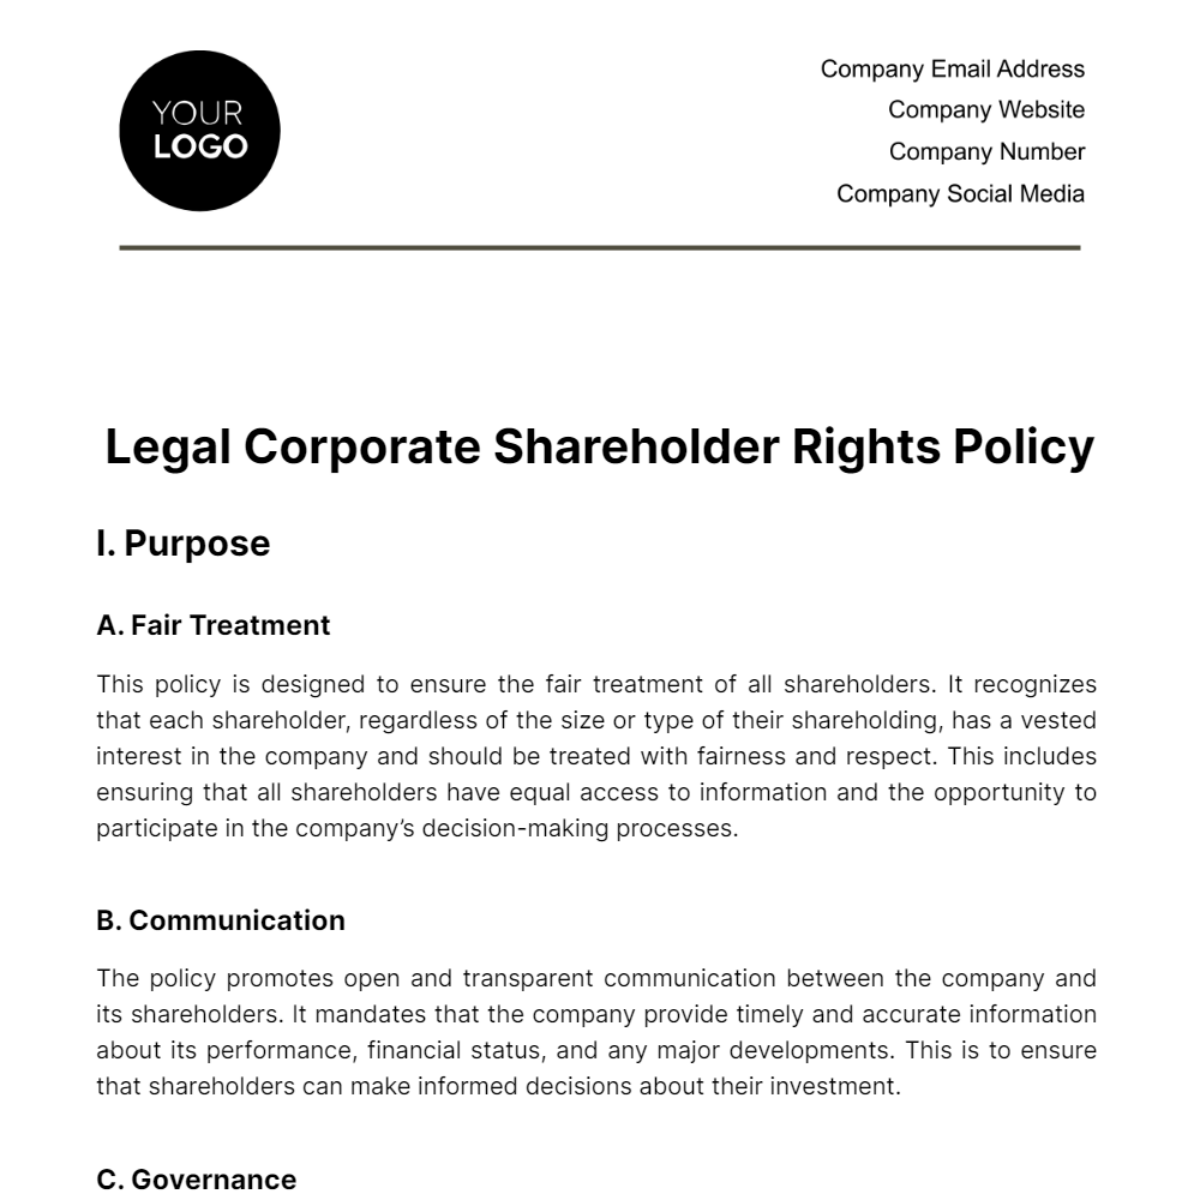 Free Legal Corporate Shareholder Rights Policy Template